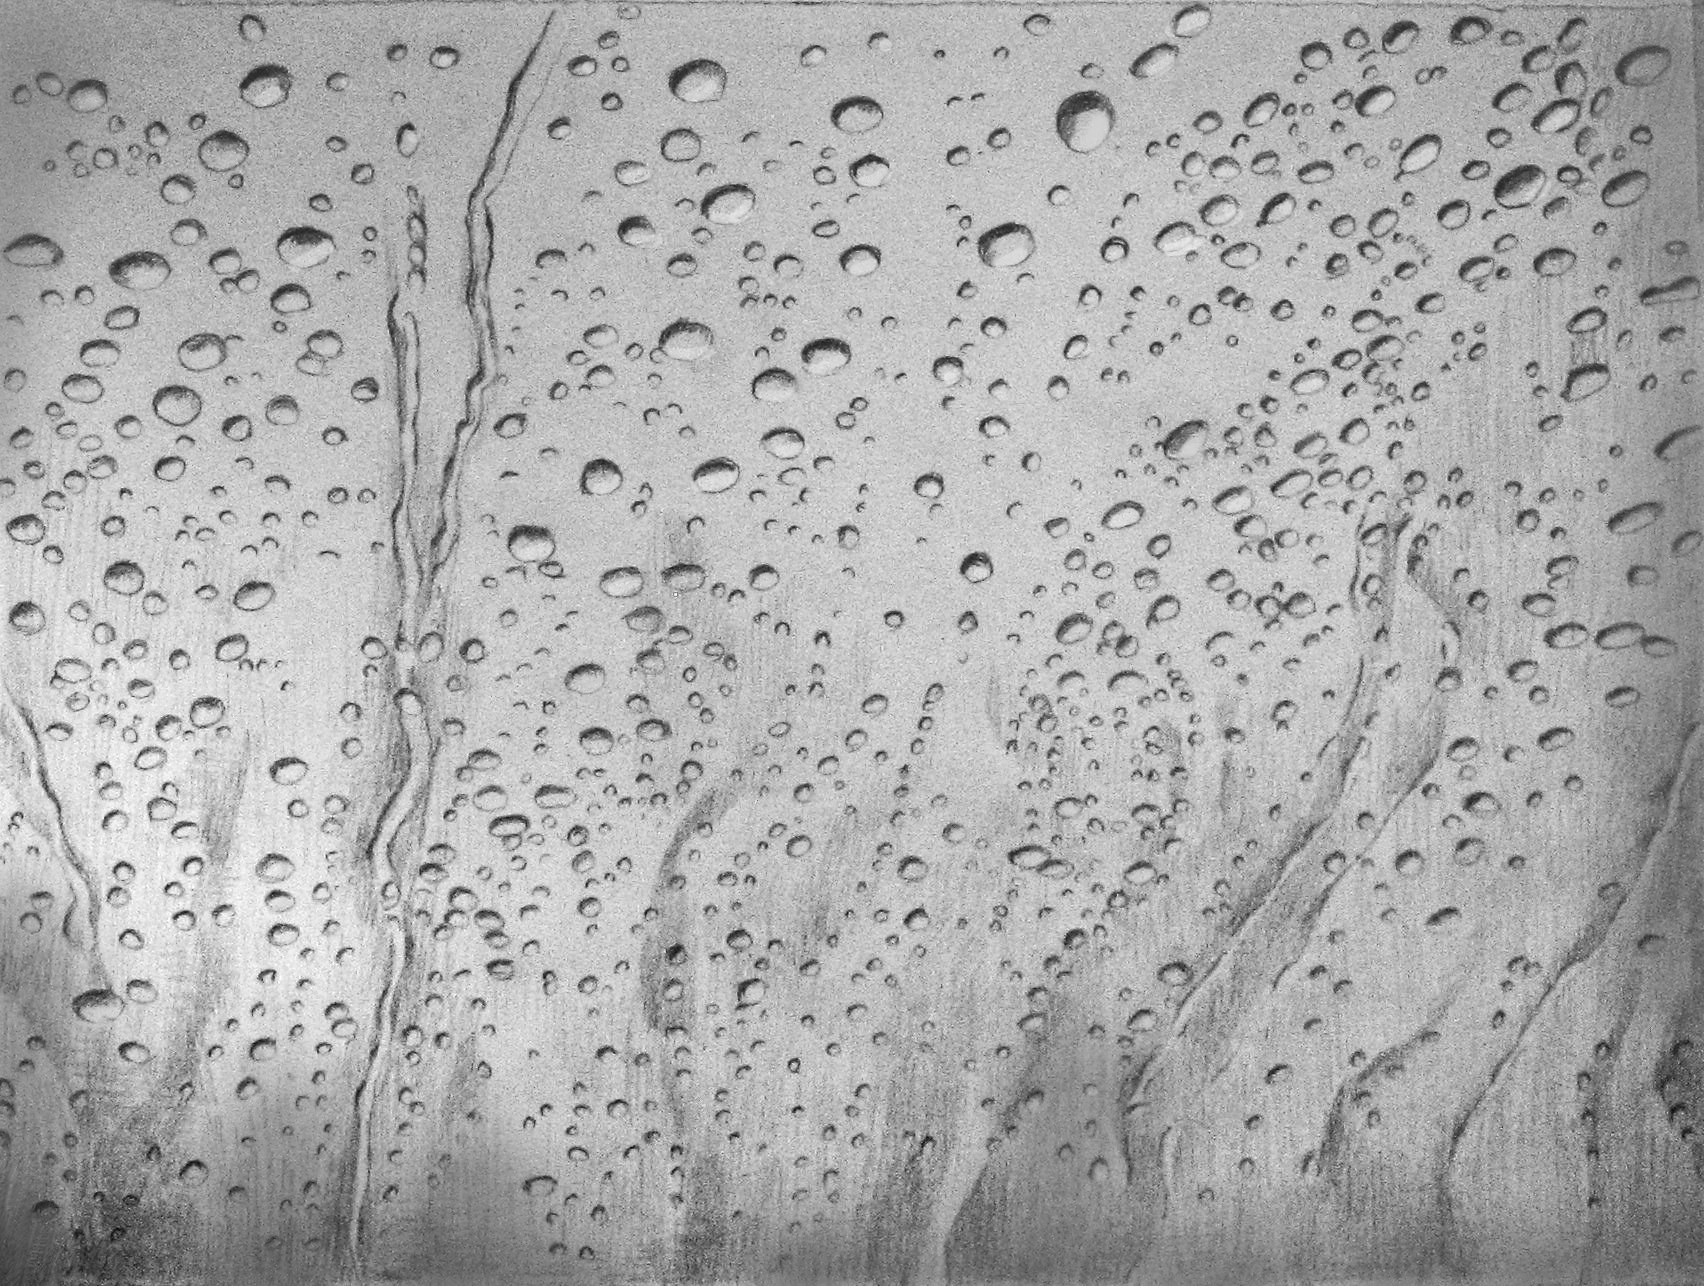 How to Draw Rain Drops: 15 Steps (with Pictures) - wikiHow